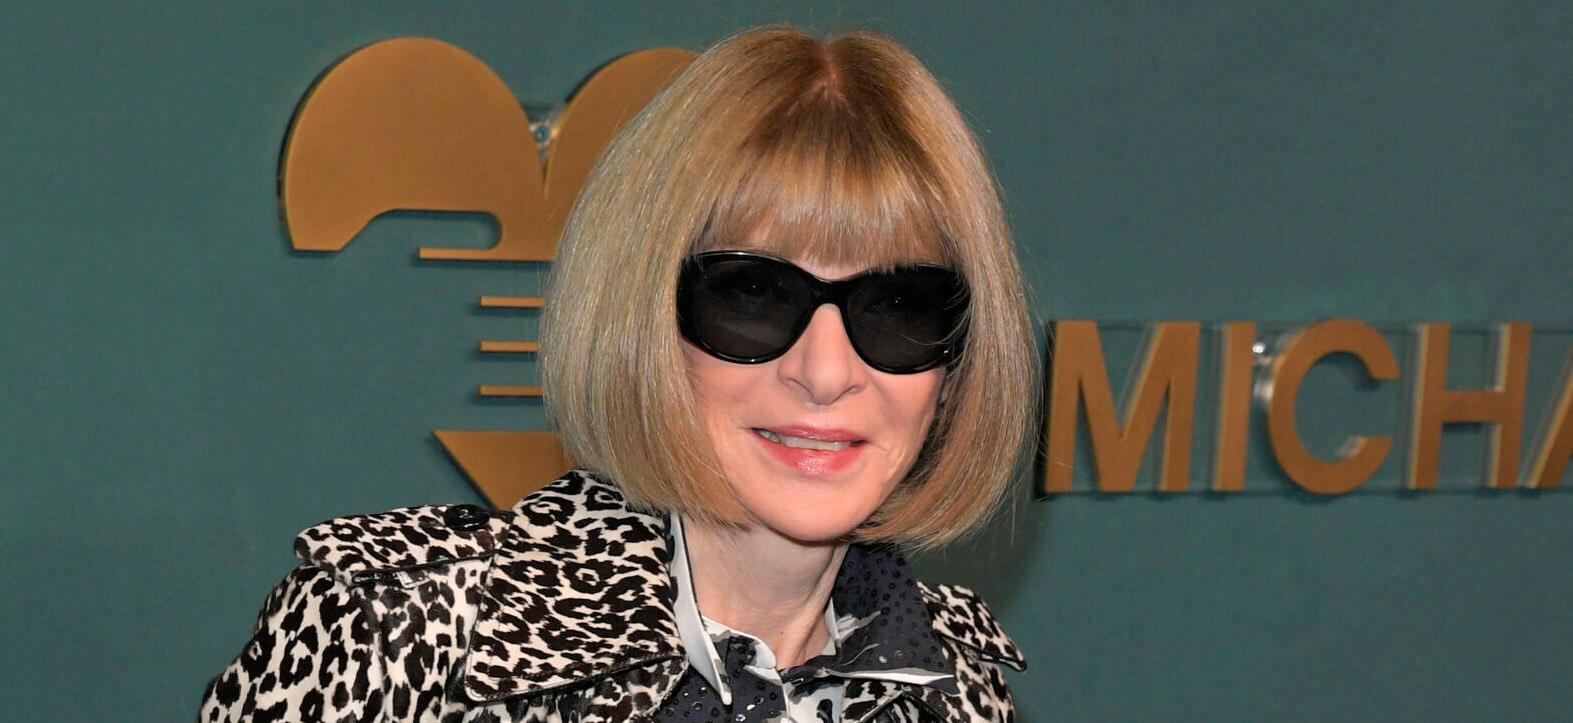 Anna Wintour Hits Tony Awards Red Carpet In Style Amid Call To Step Down